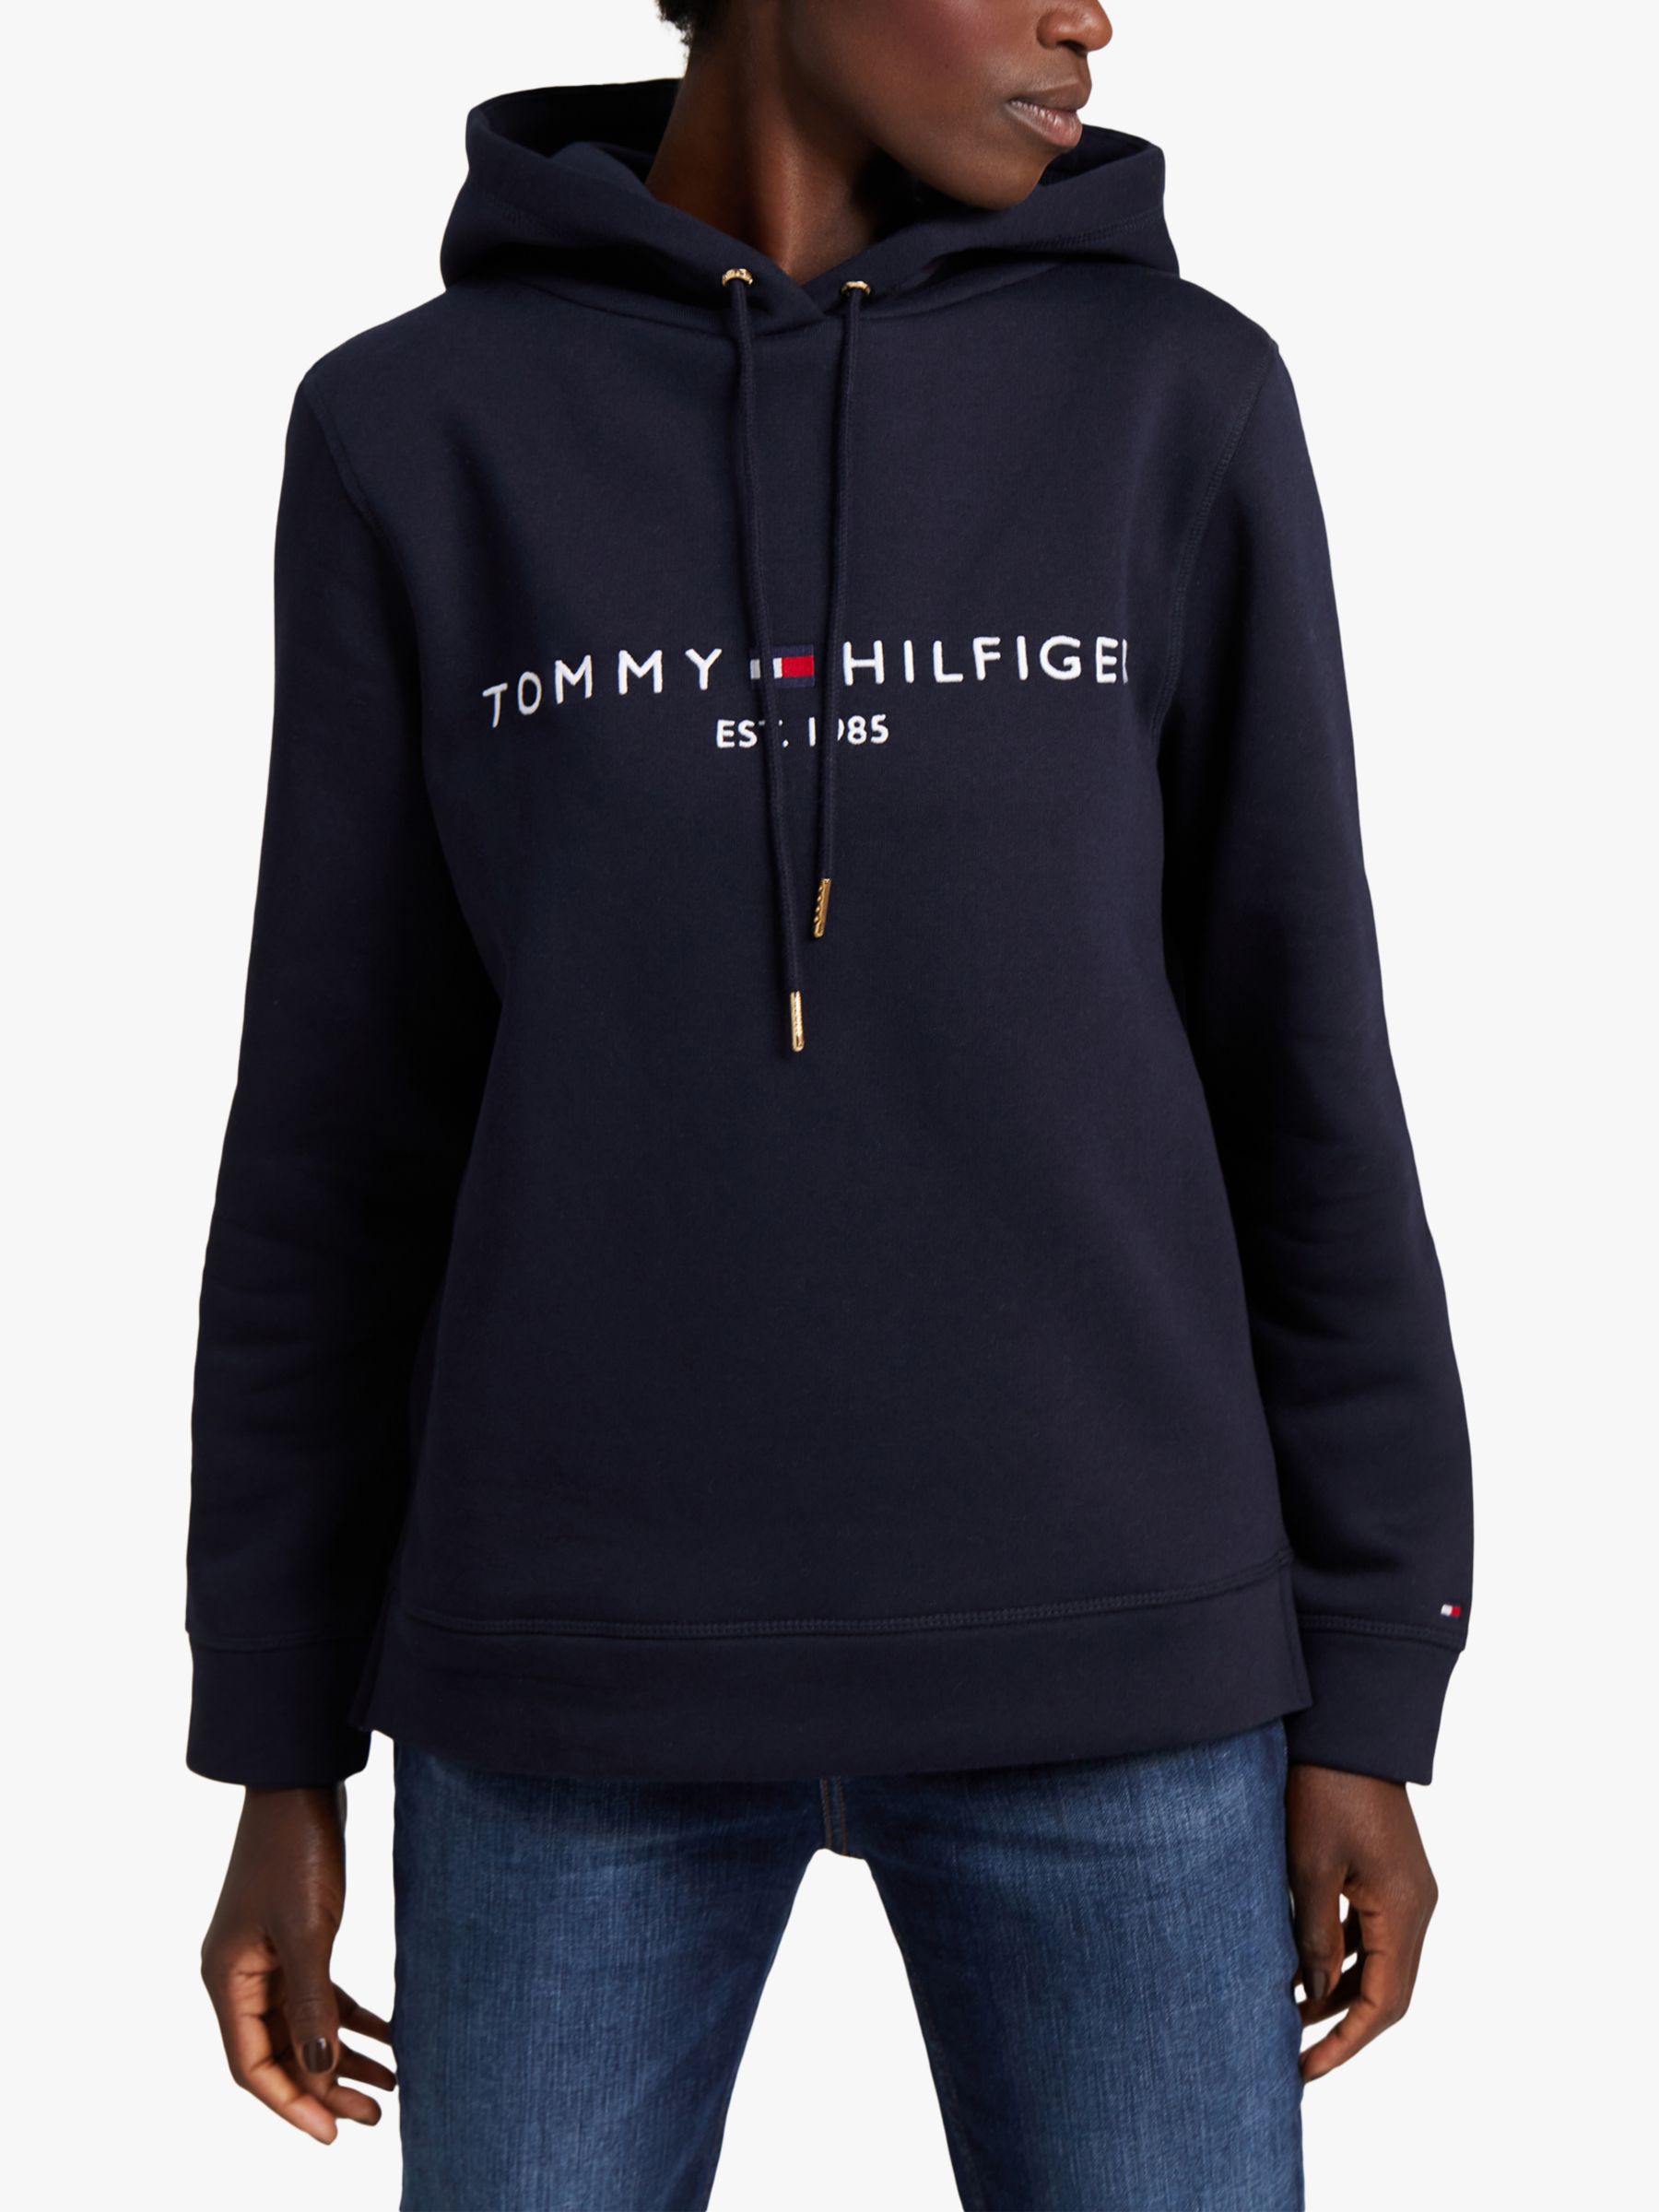 NEW Tommy Hilfiger Sport Fleece Jacket Womens Small Zip Up Black Embroidered